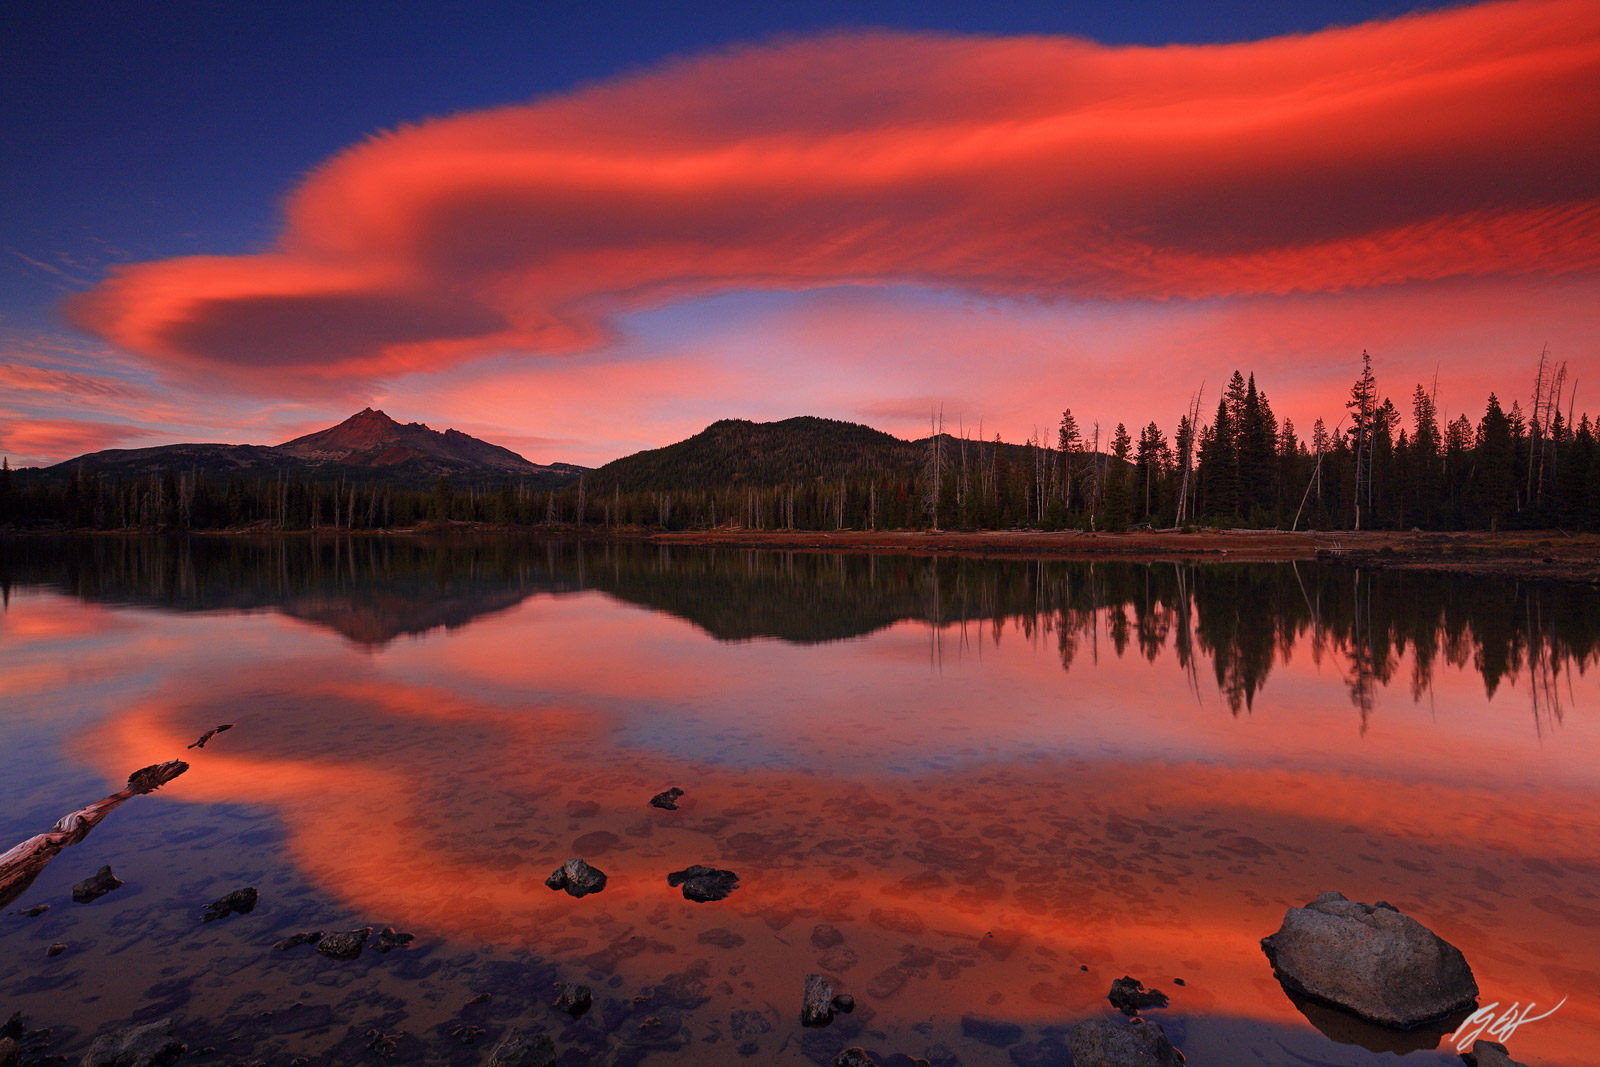 Crazy Cloud at Sunset with Broken Top from Sparks Lake in the Deschutes National Forest in Oregon